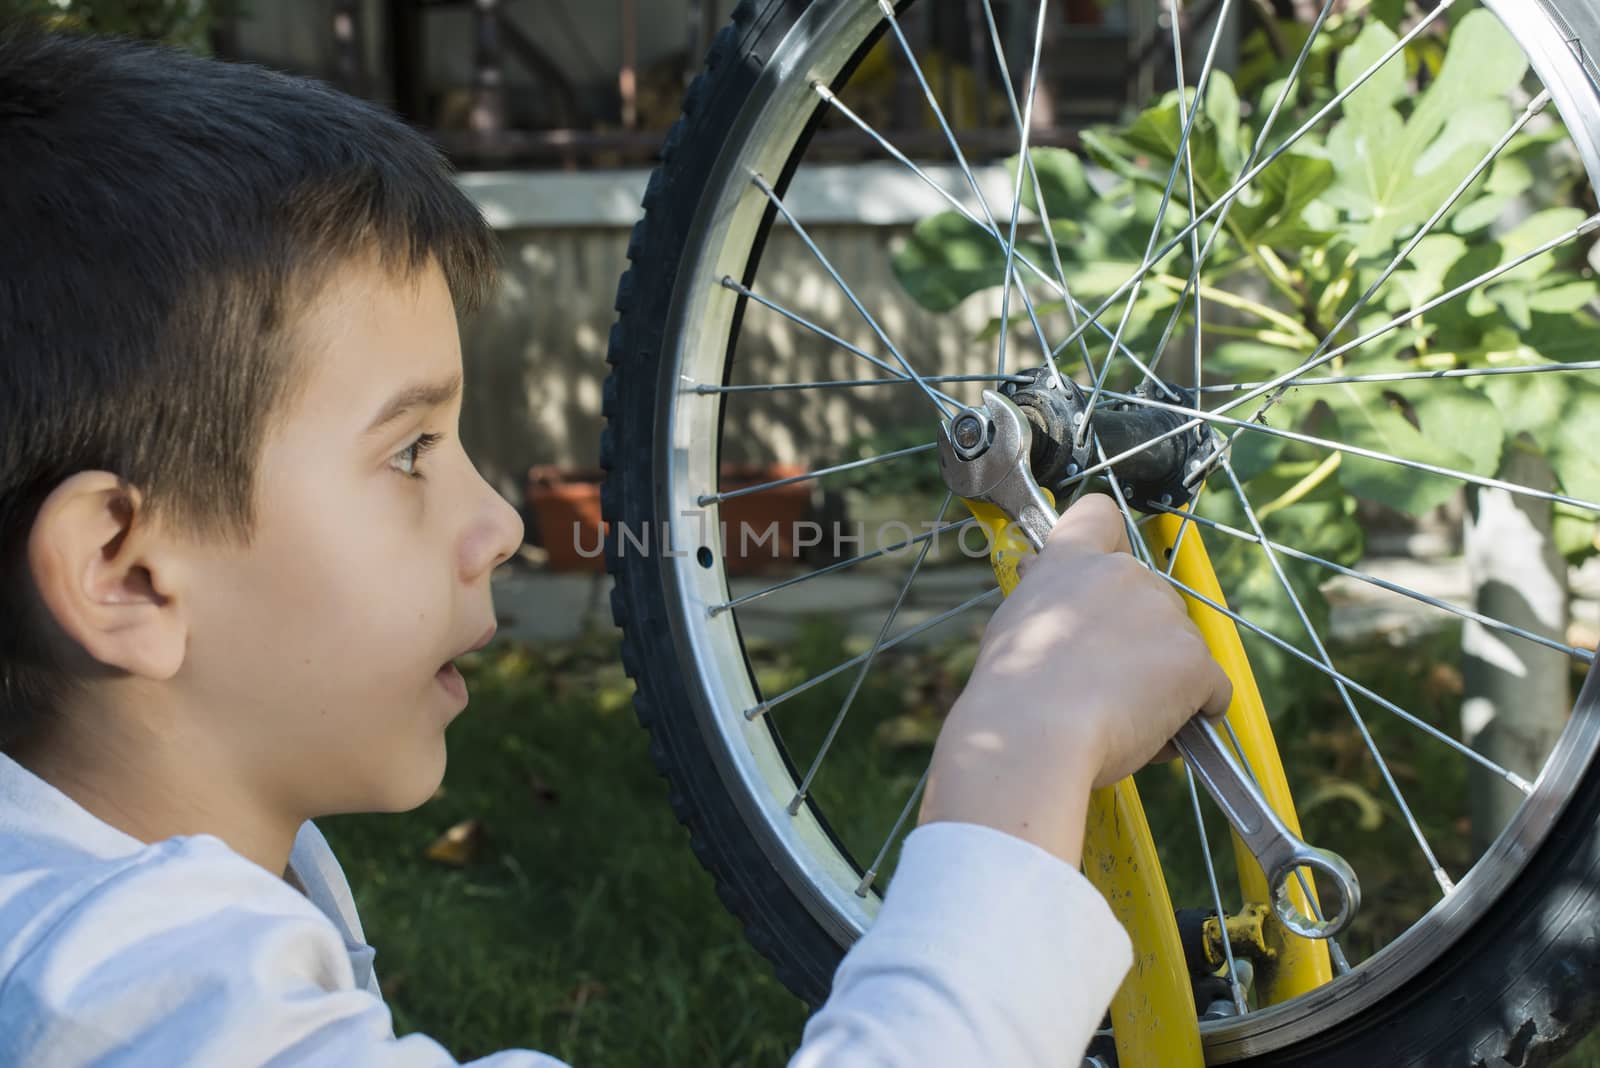 Child who fix bikes. Boy and bicycle